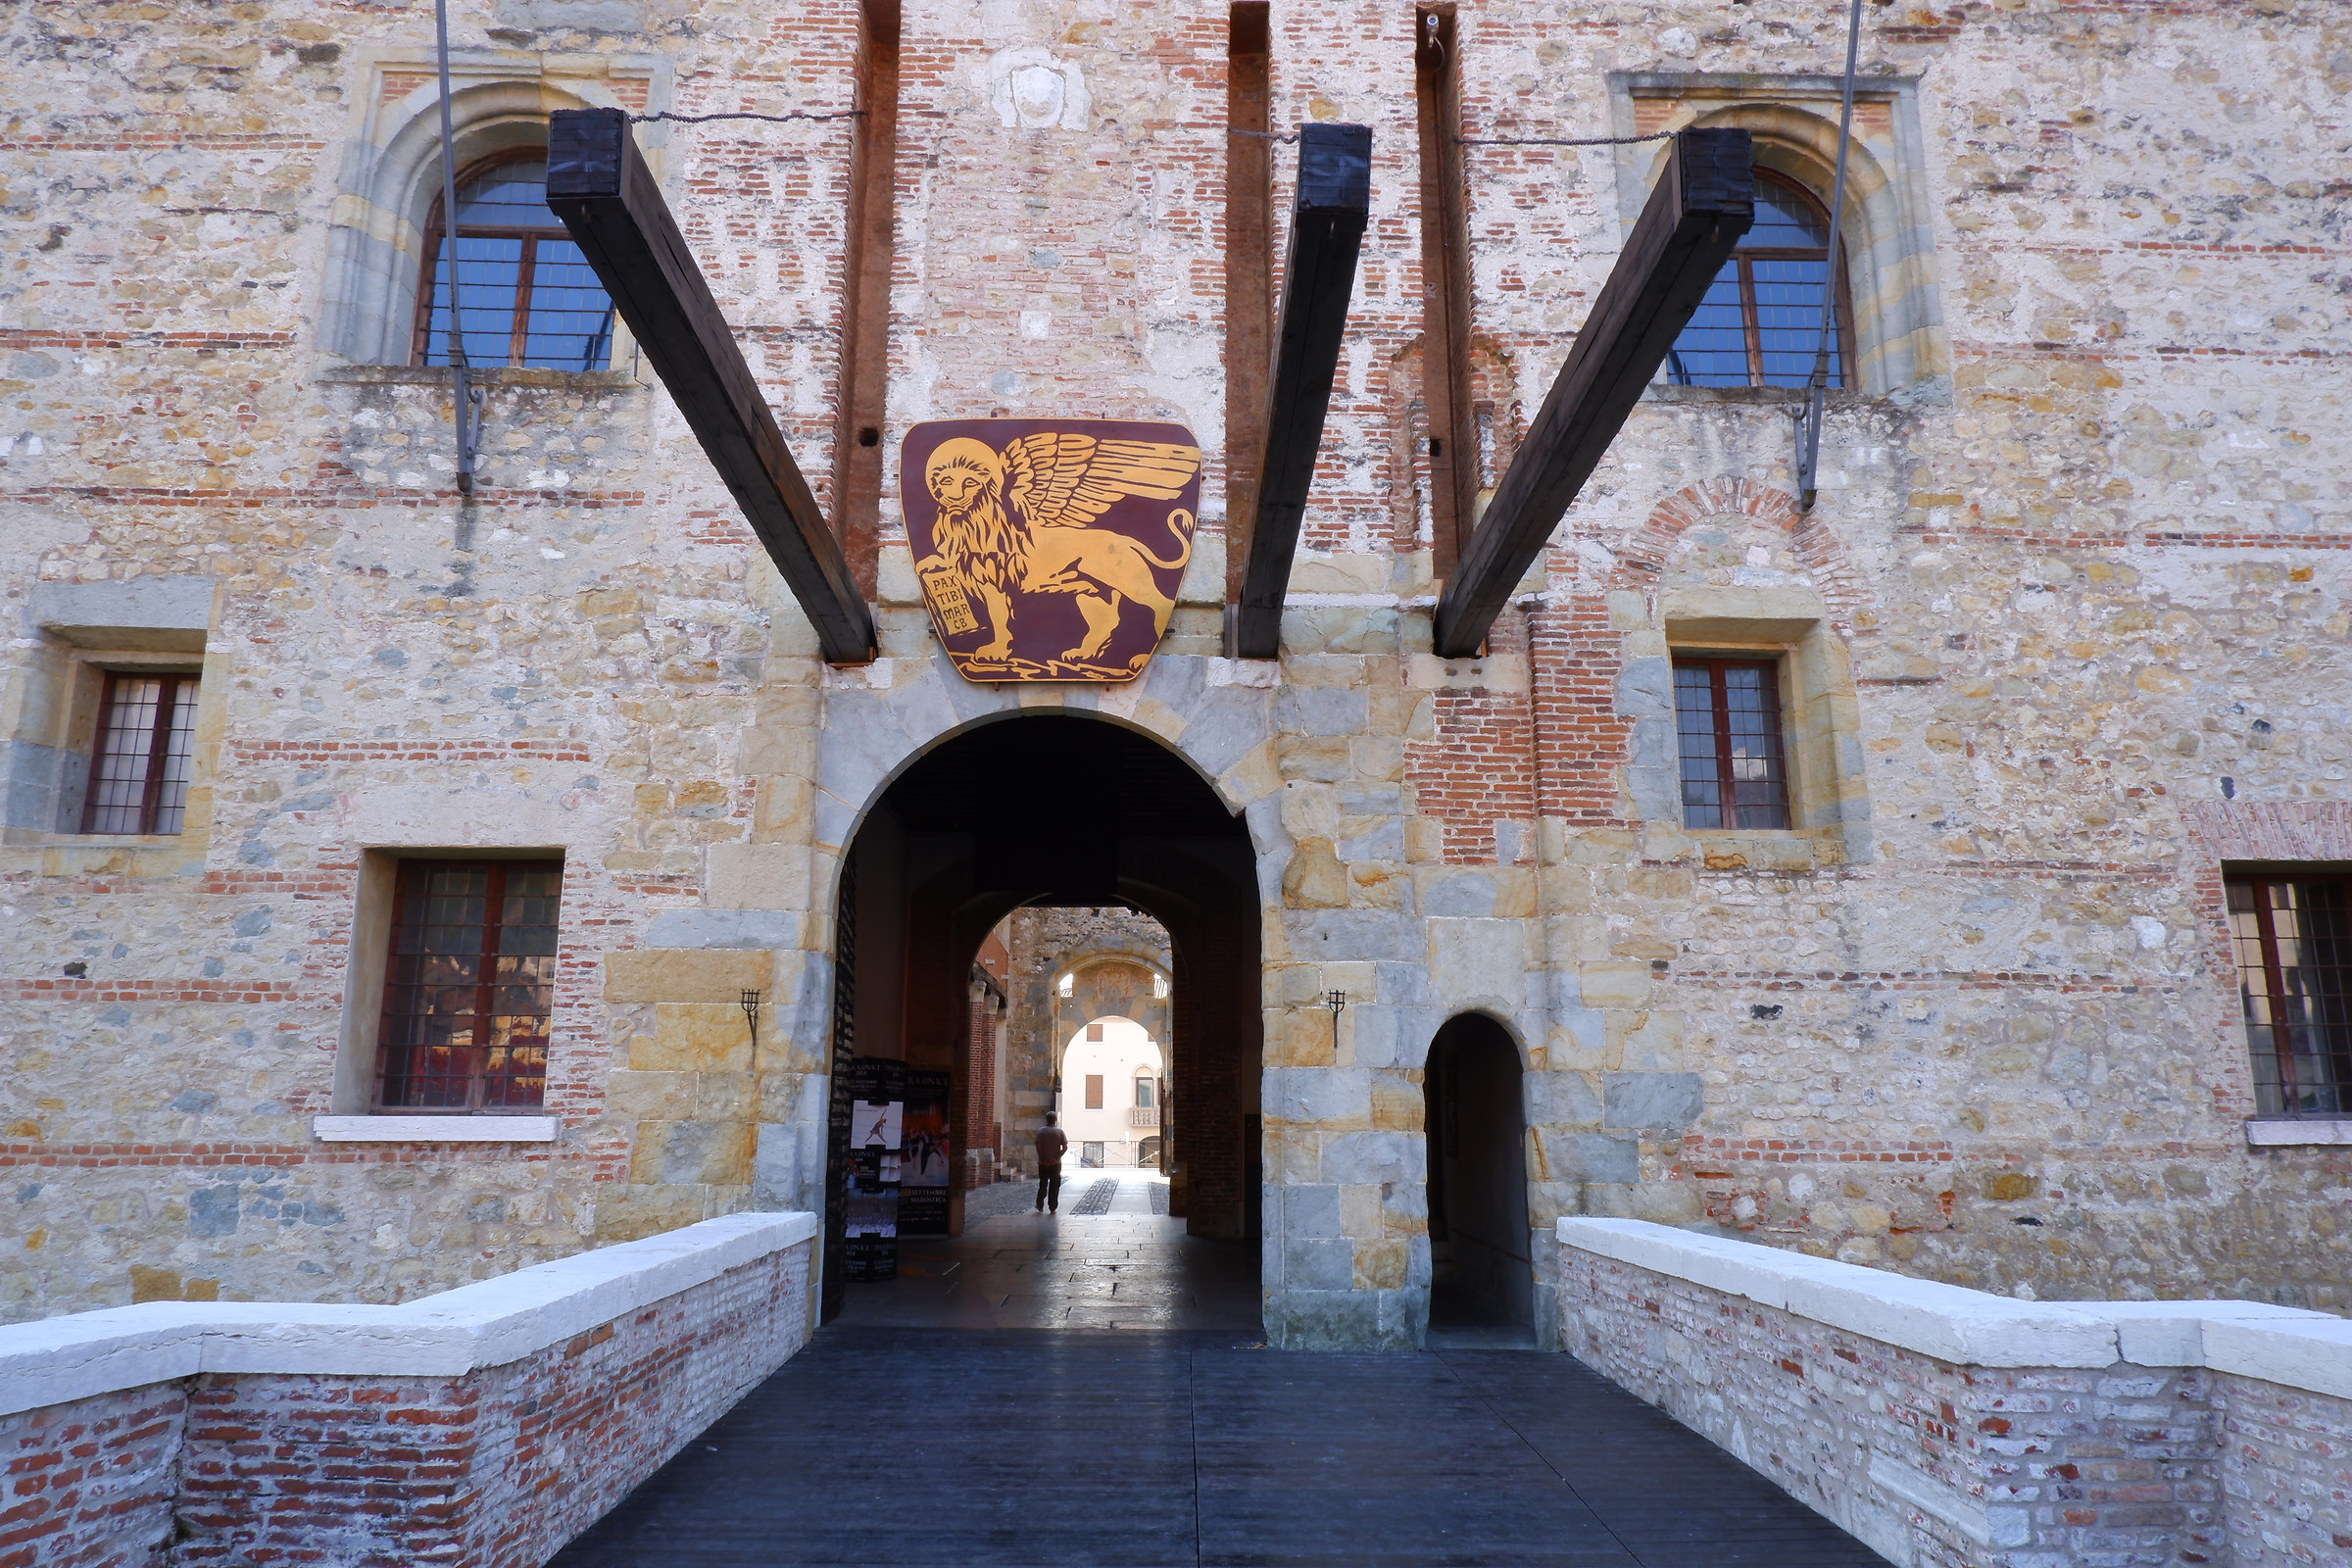 Entrance to the Castle...